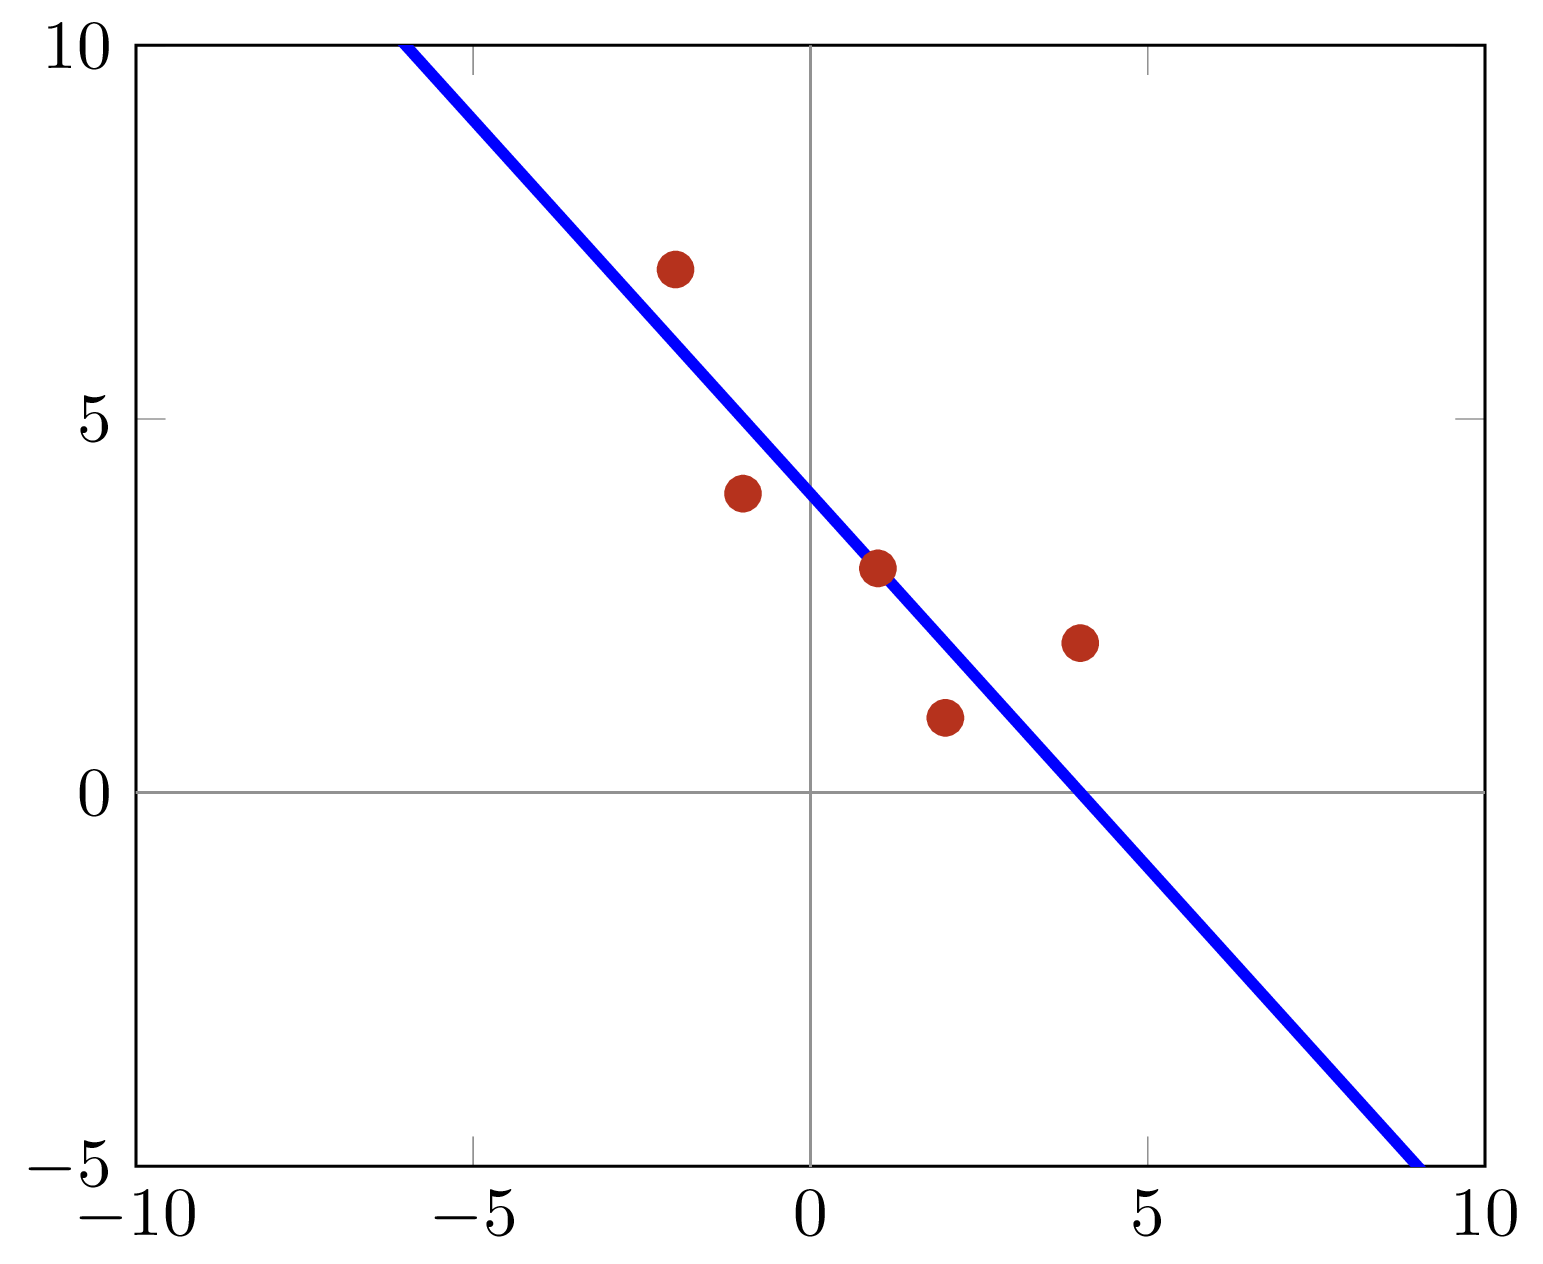 Linear regression is a straight line